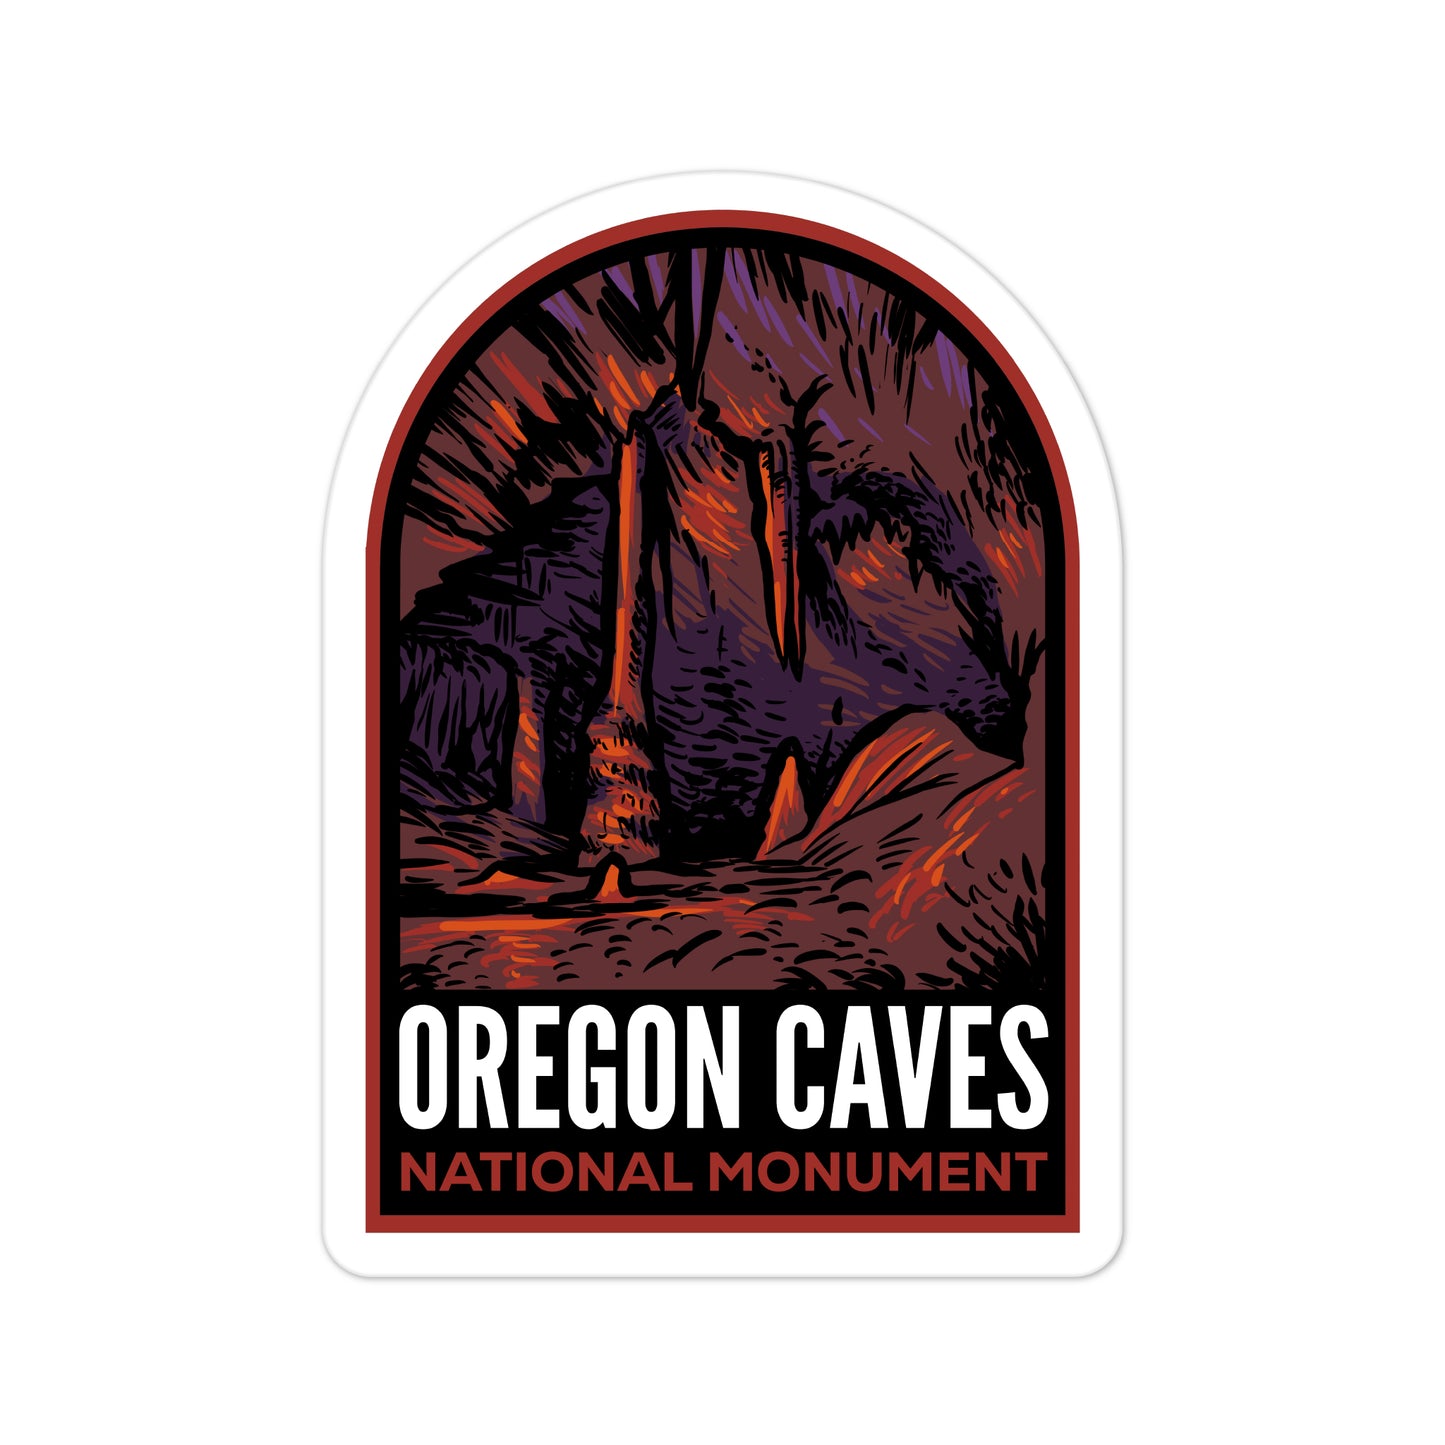 A sticker of Oregon Caves National Monument